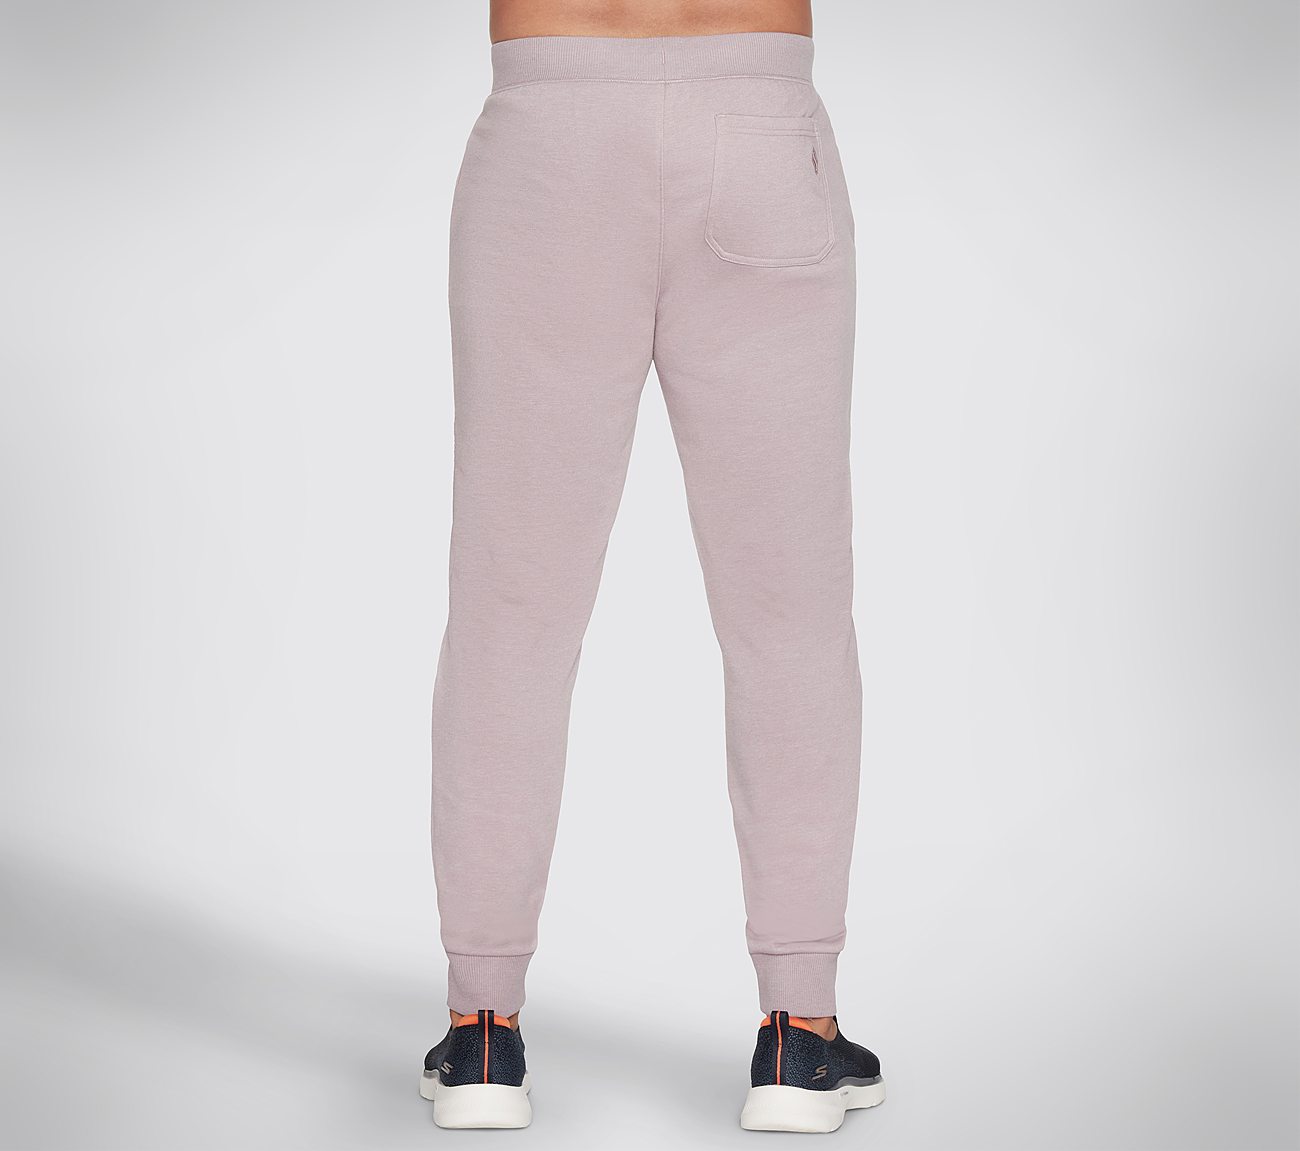 EXPEDITION JOGGER, TAUPE/LAVENDER Apparel Top View